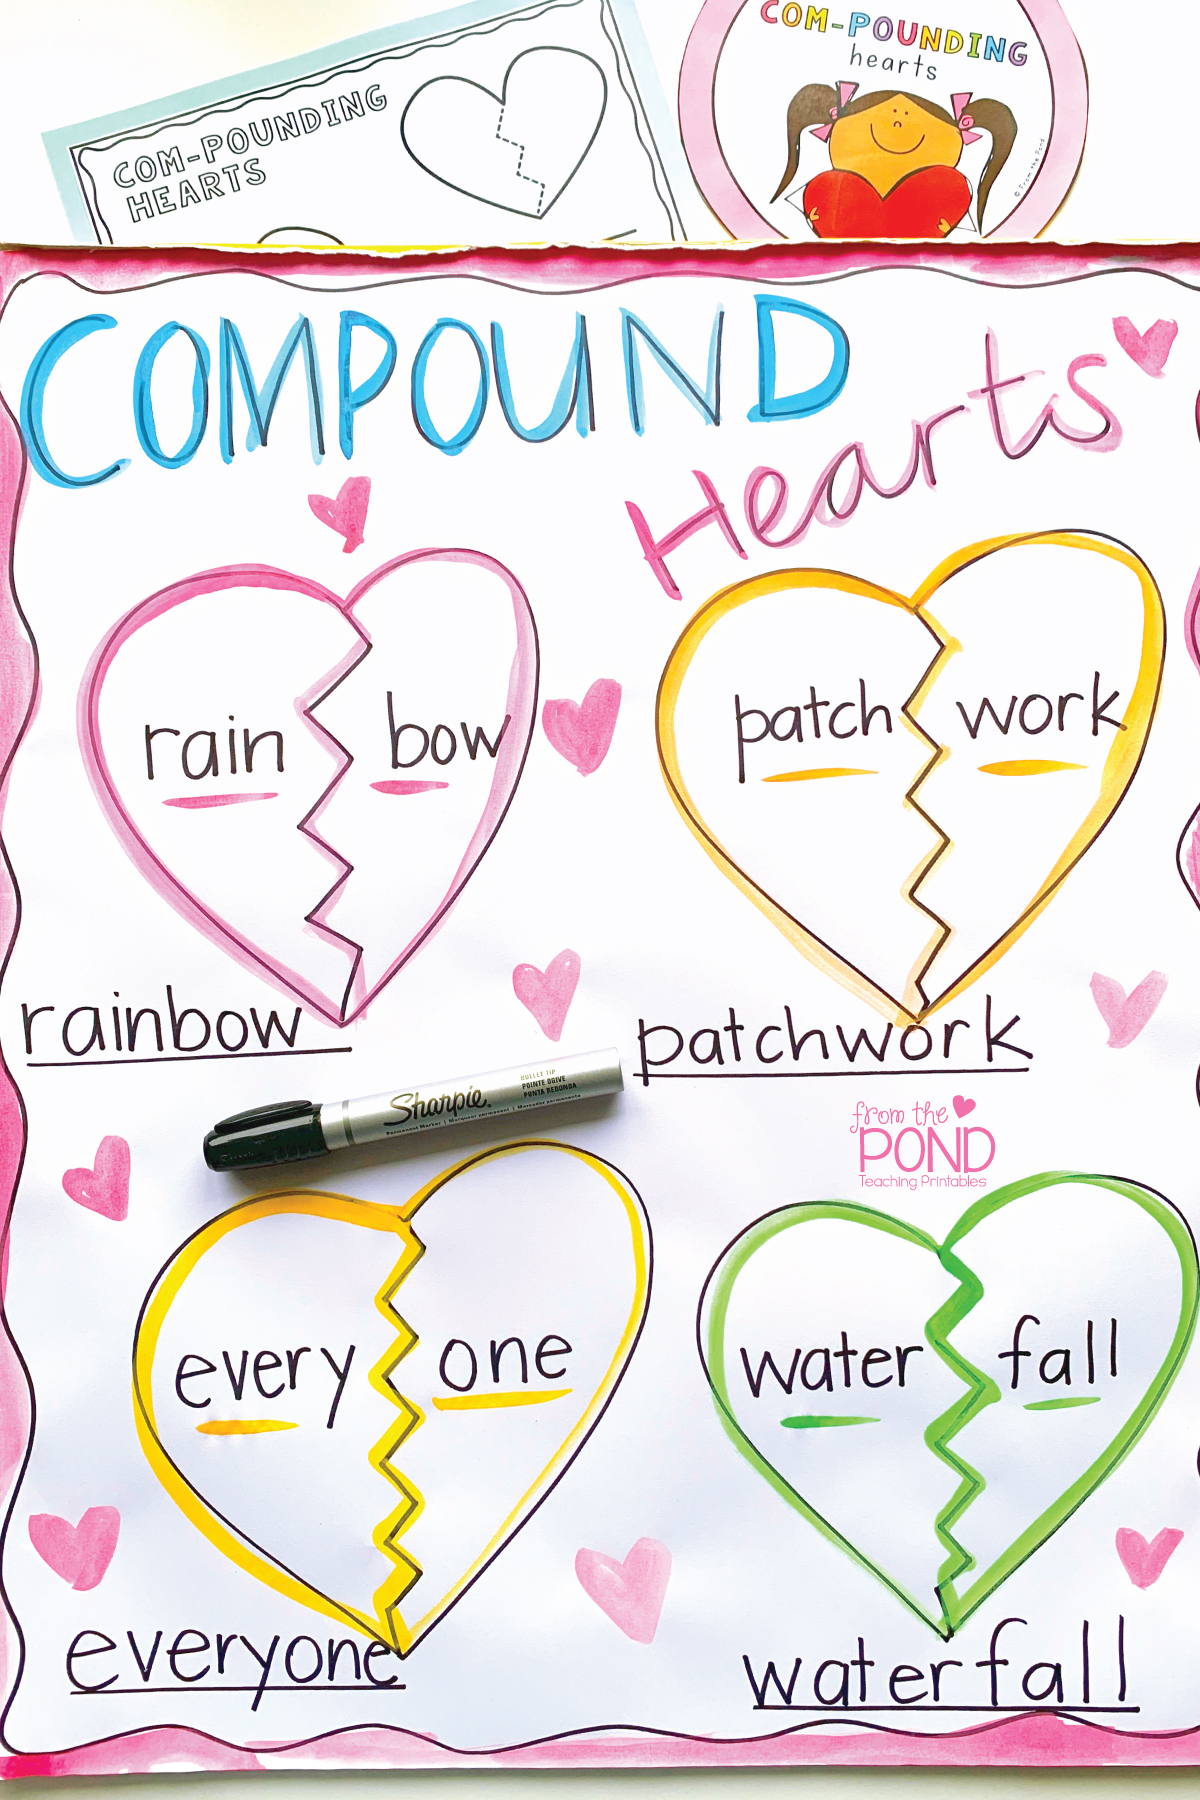 Compound words chart